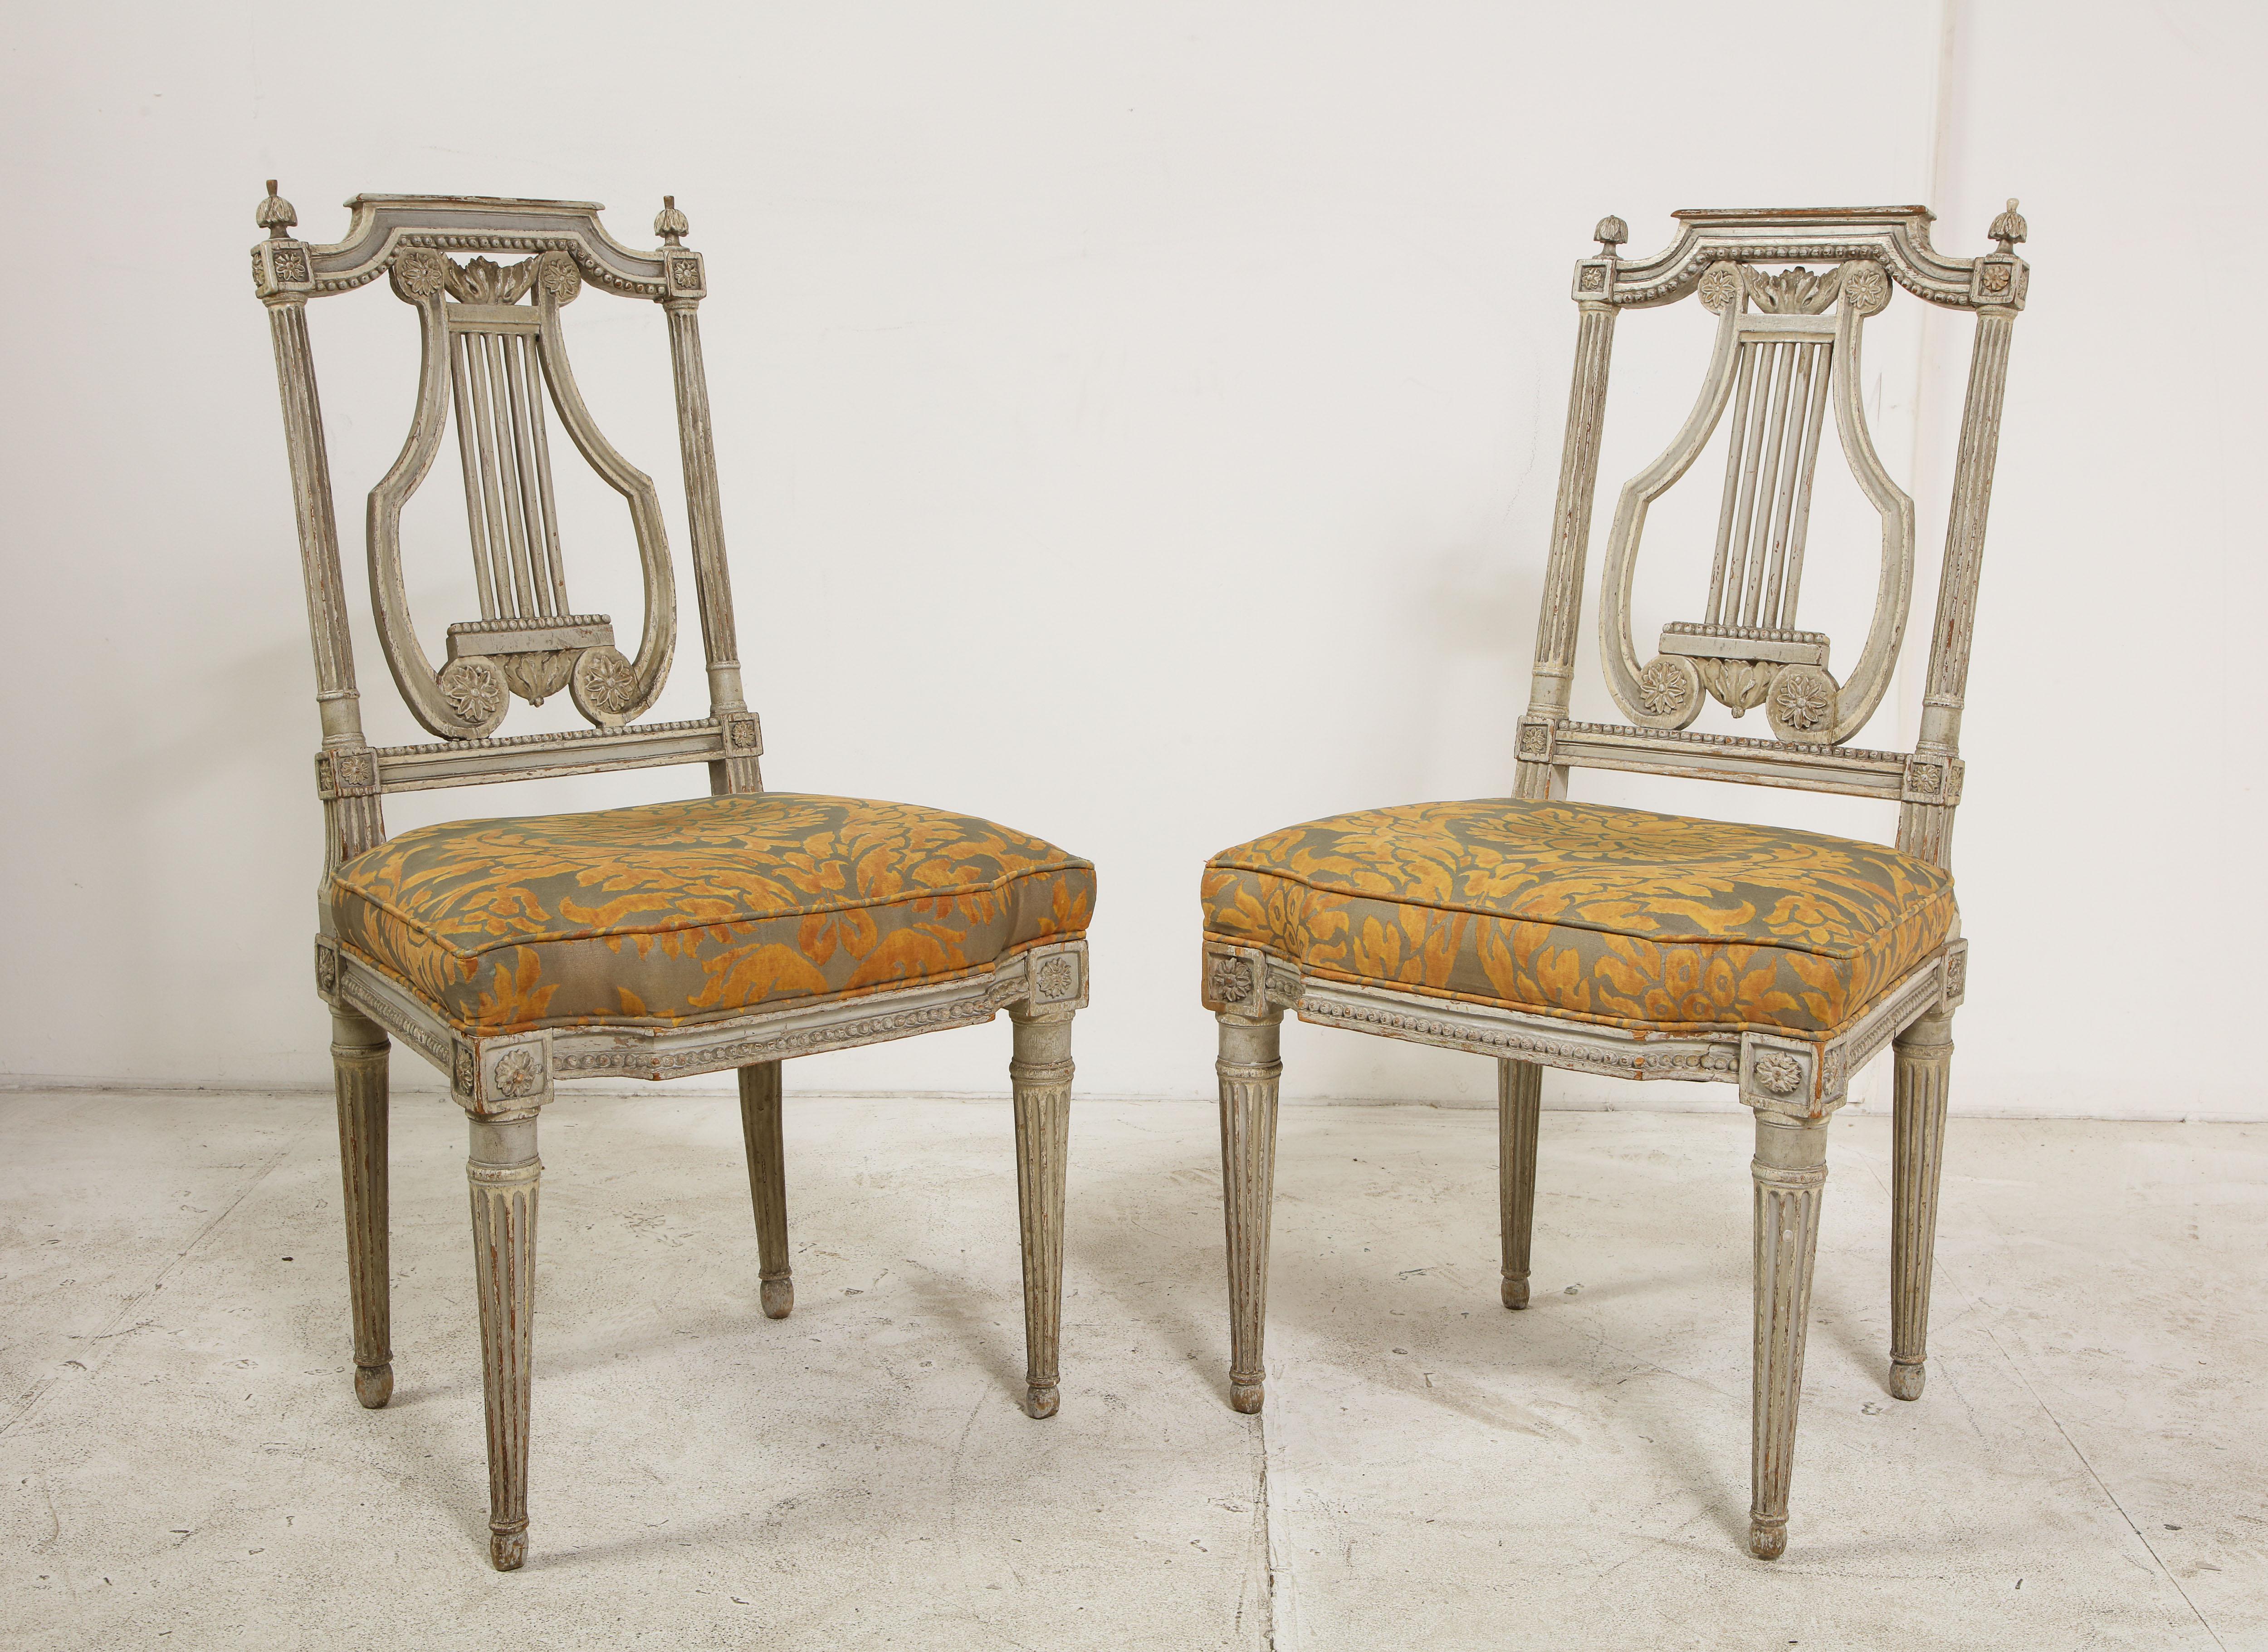 Pair of 19th Century Italian Painted Lyre-Back Chairs with Fortuny Seat Cushions 12